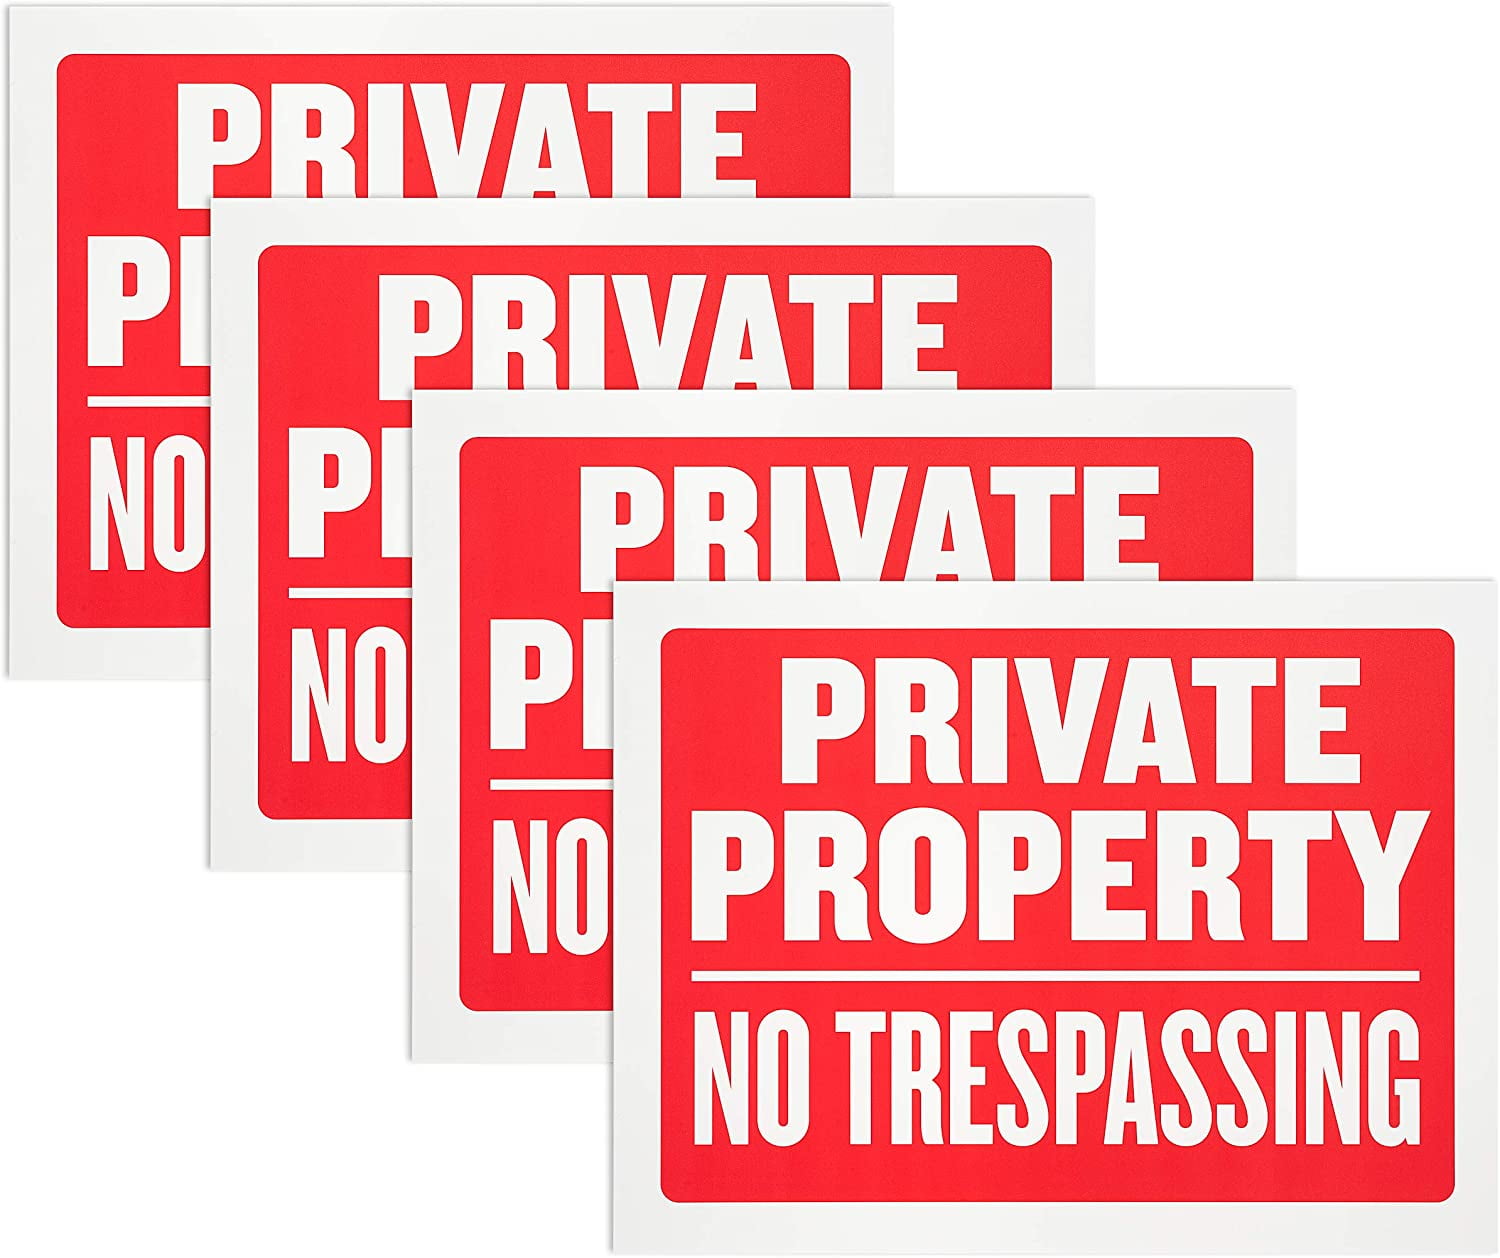 No Trespassing You Are Here in Cross Hairs Rifle Metal Novelty Sign Security